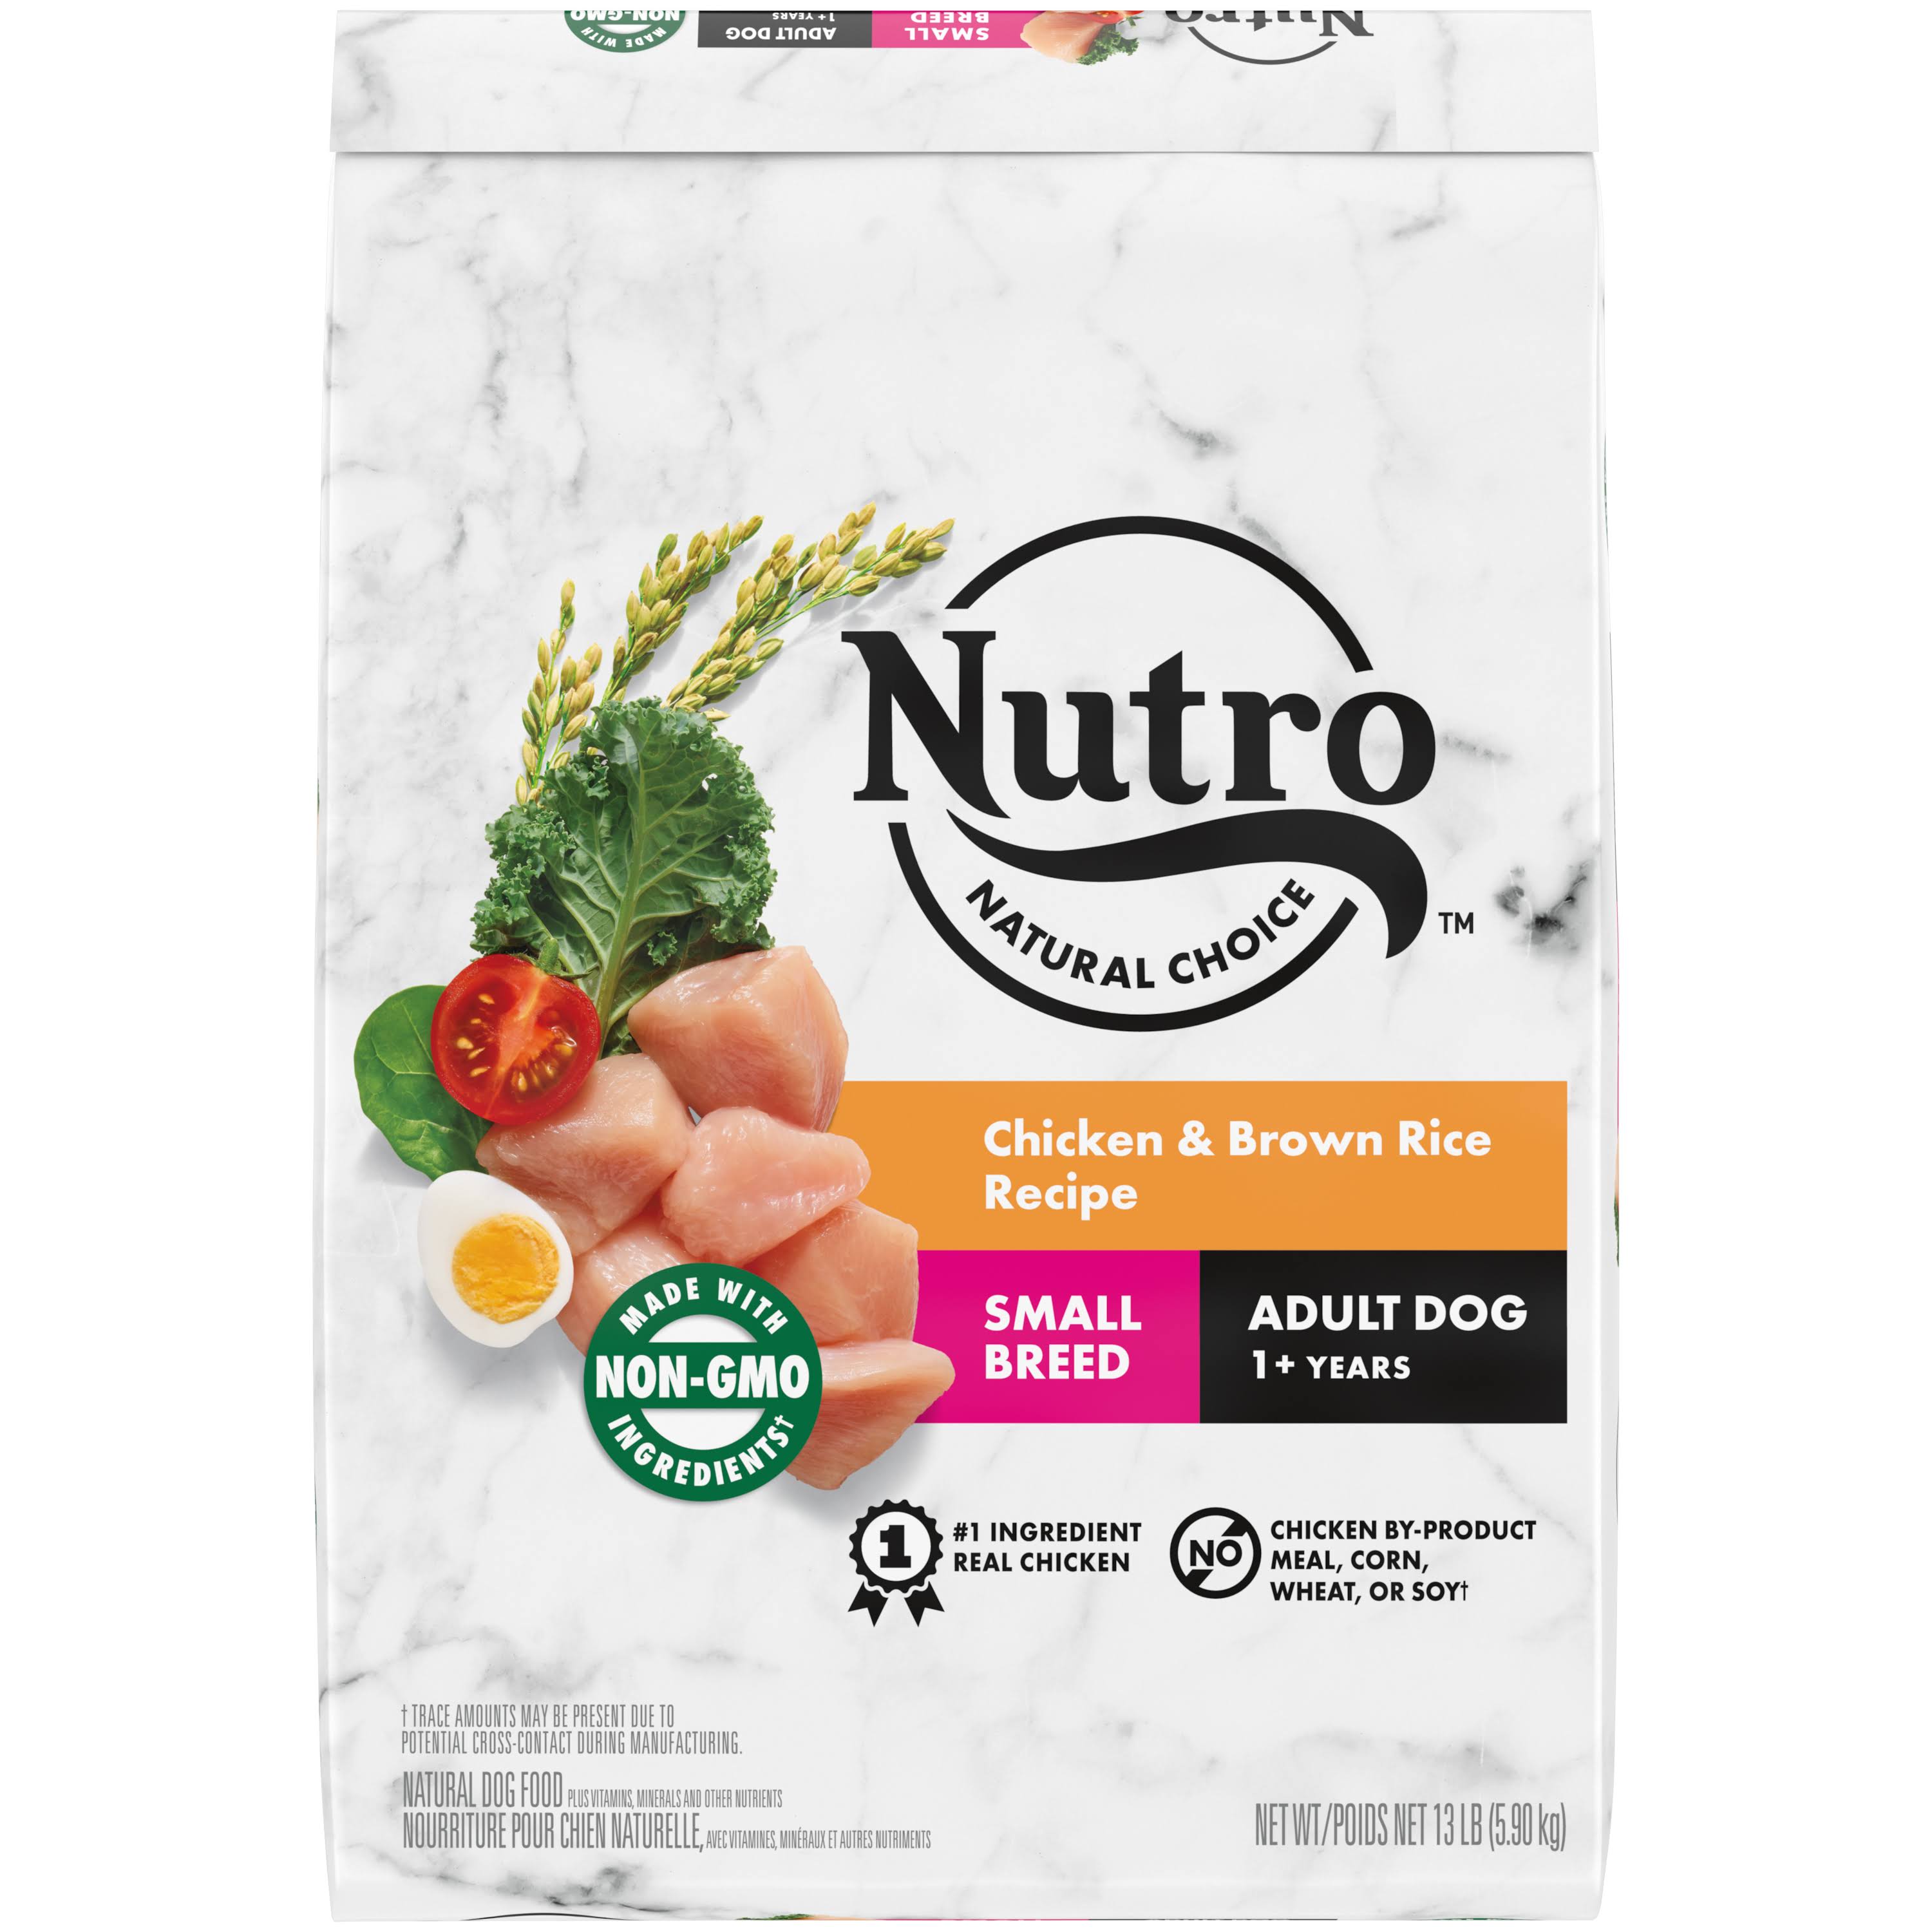 NUTRO Natural Choice Small Breed Adult Dry Dog Food, Chicken & Brown Rice Recipe Dog Kibble, 13 Lb Bag